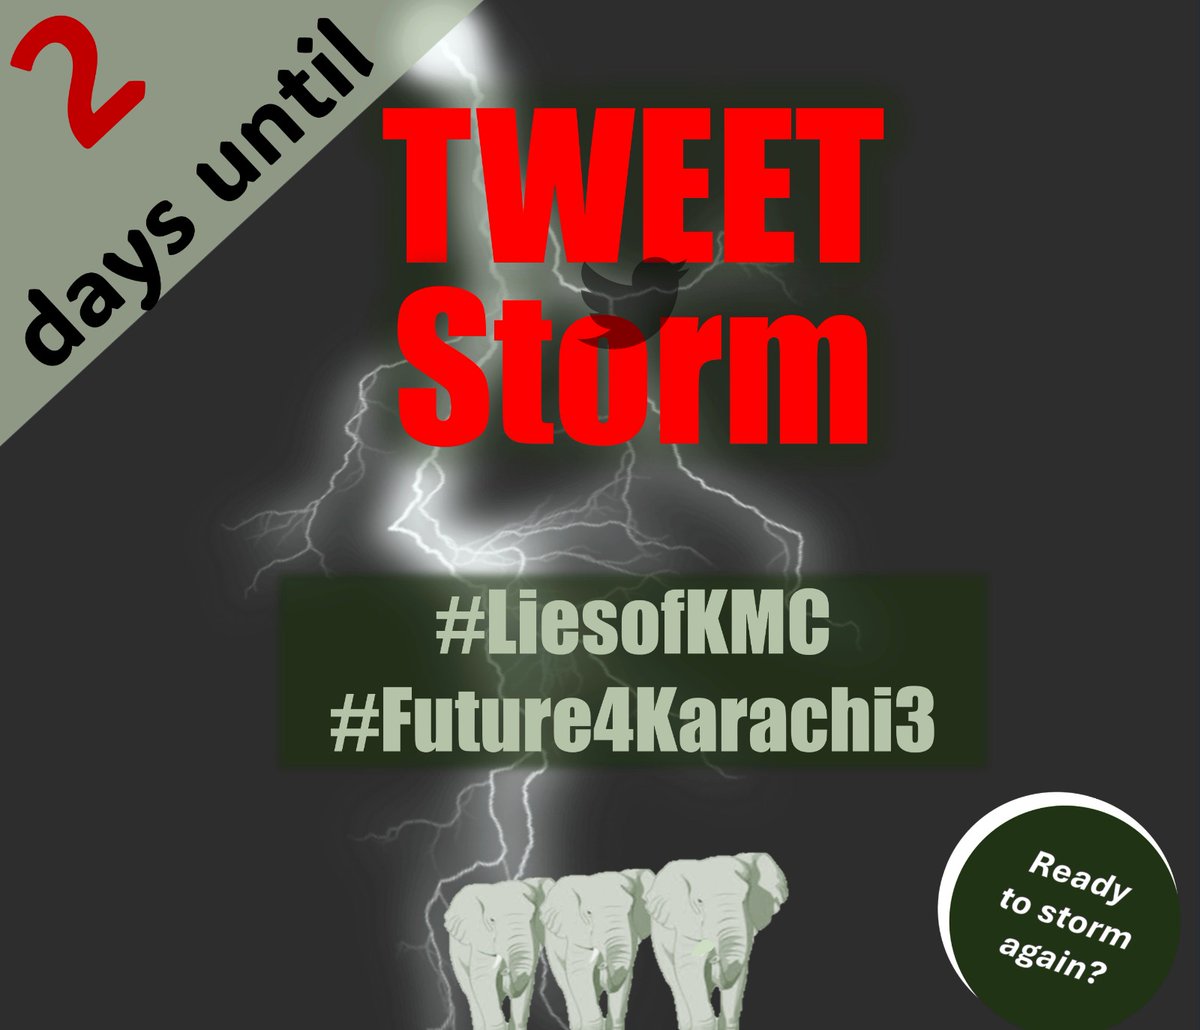 🟥🟥🟥🟥  15 NOV  🟥🟥🟥🟥
🟥🟥🟥TWEETSTORM🟥🟥🟥
🟥🟥 🐘🐘🐘#Karachi3 🟥🟥
2 days to go... 
Are you ready to join in again to tweet for 3 elephants in captivity?
🇵🇰 #LiesofKMC
🇵🇰 #Future4Karachi3
Tweetsheets will be available as always automatically prepared.
Watch this place 👆🏼